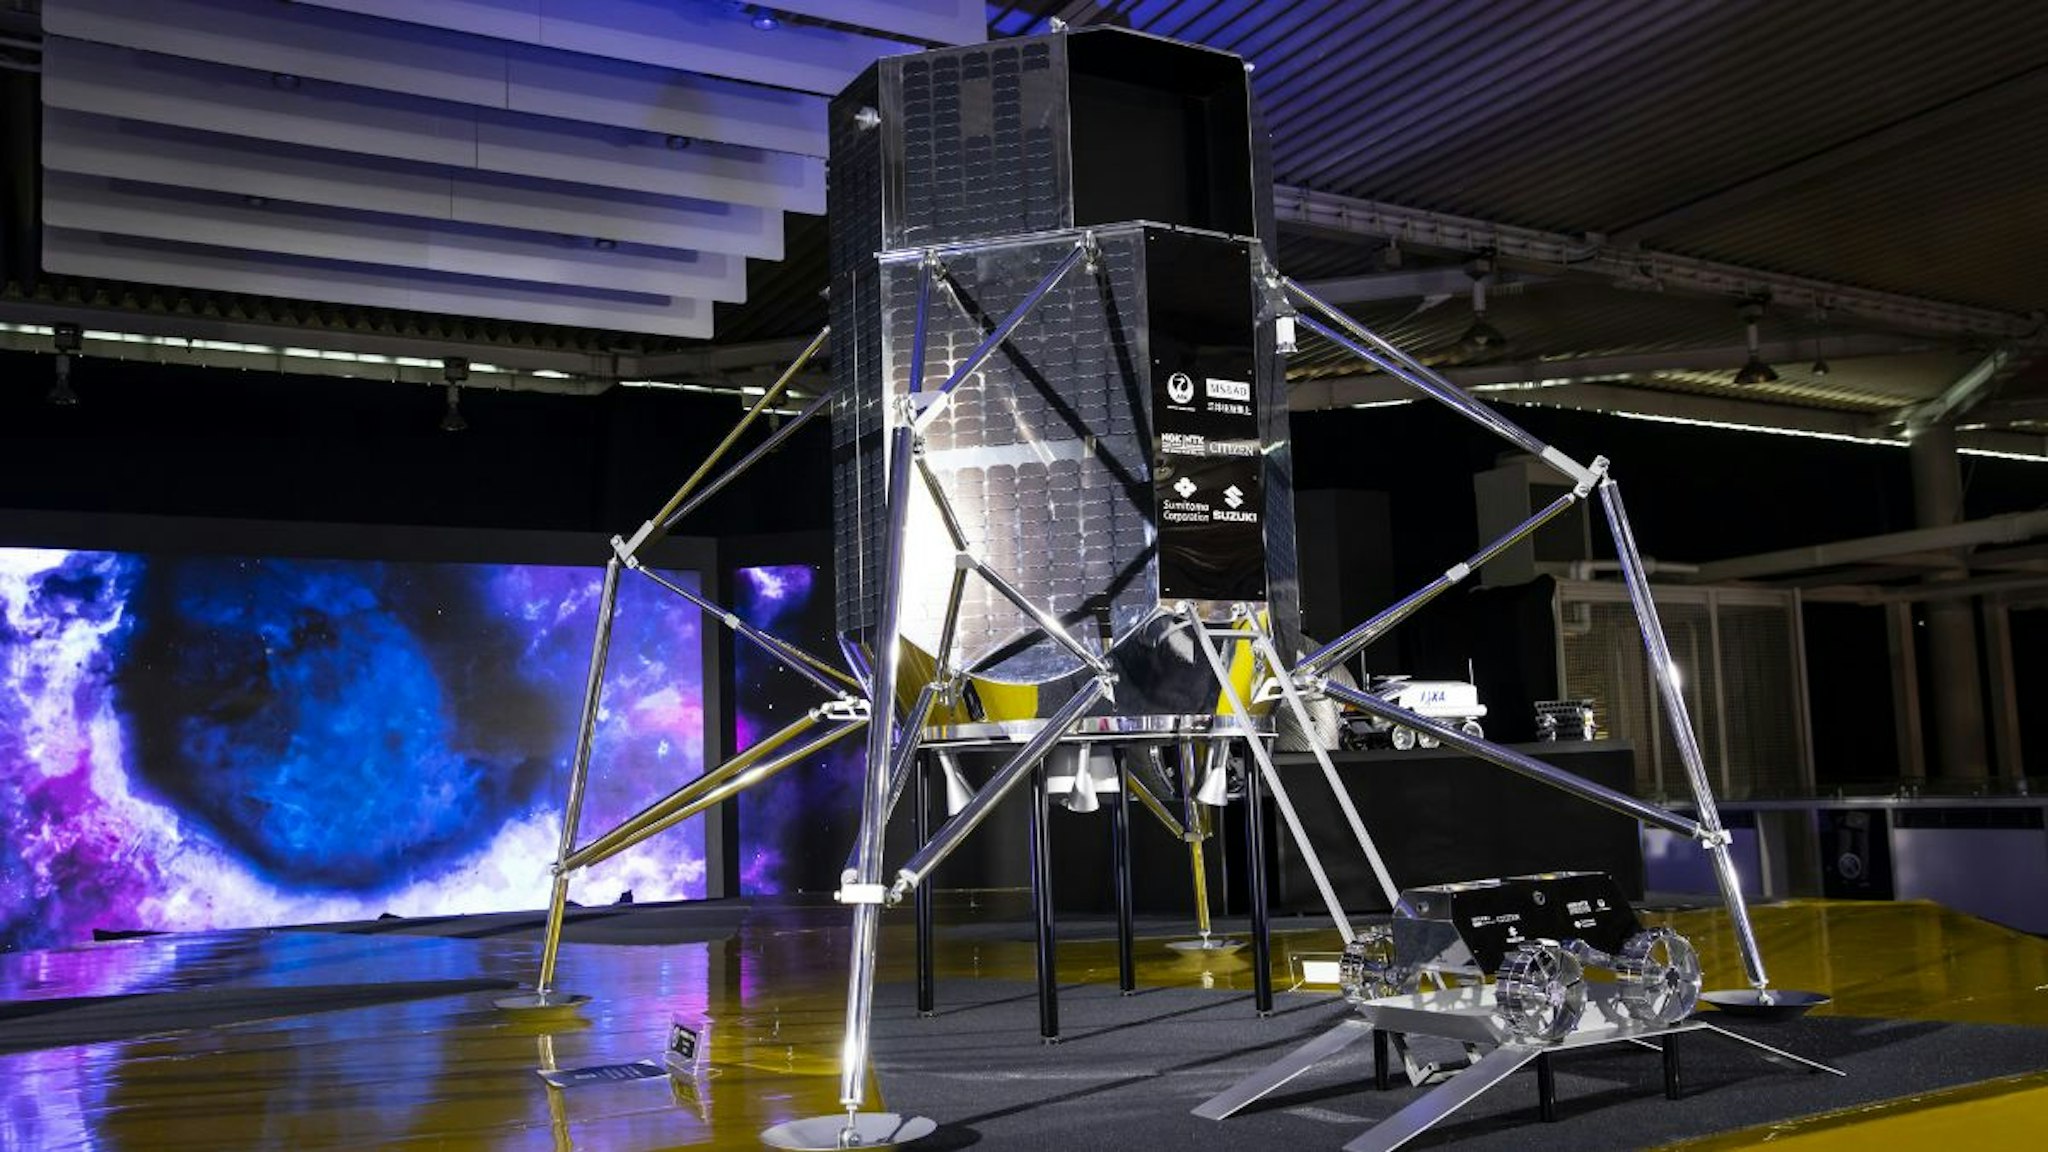 A full-scale model of ispace Inc.'s lunar lander and lunar rover HAKUTO-R sit on display during the media day of the Tokyo Motor Show in Tokyo, Japan, on Wednesday, Oct. 23, 2019.